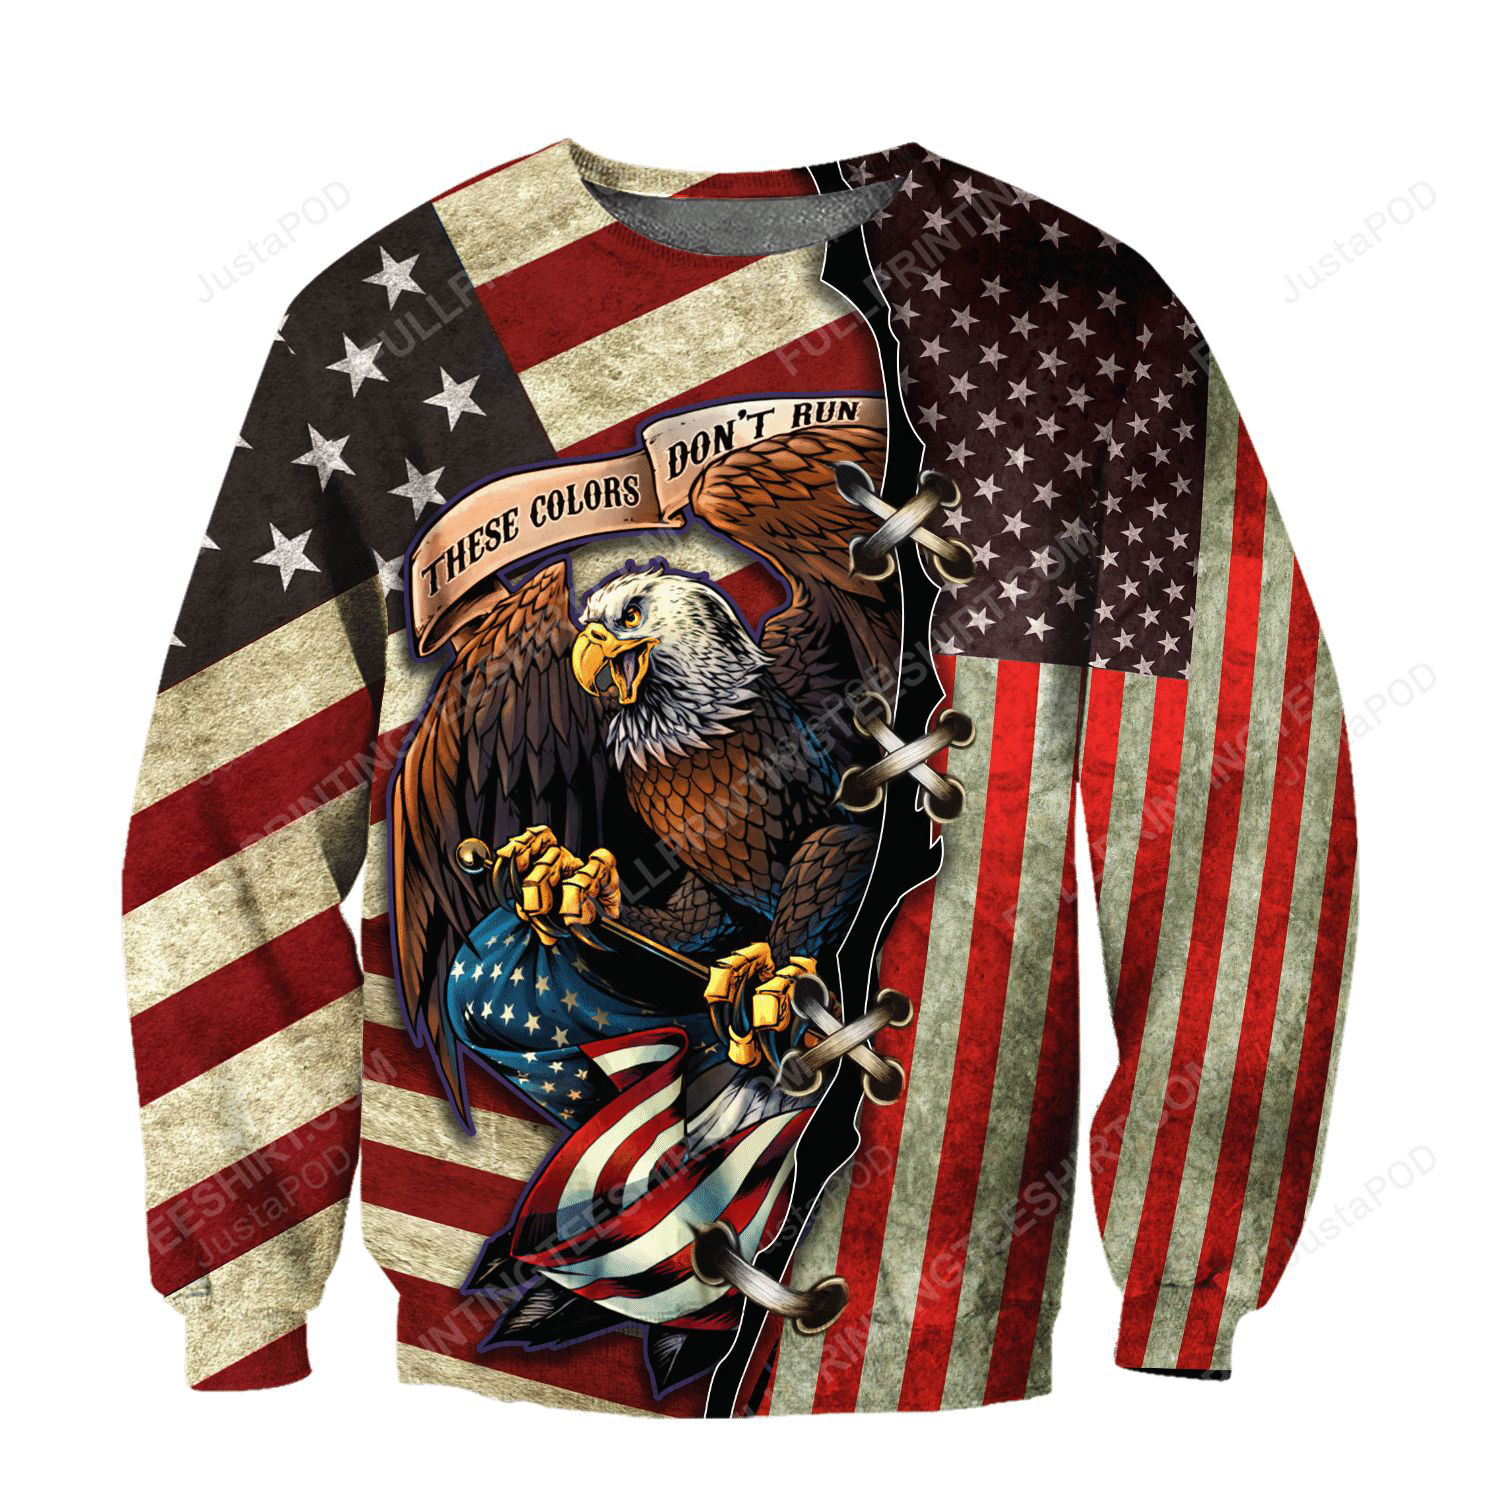 Eagle US veteran these color don't run full print ugly christmas sweater